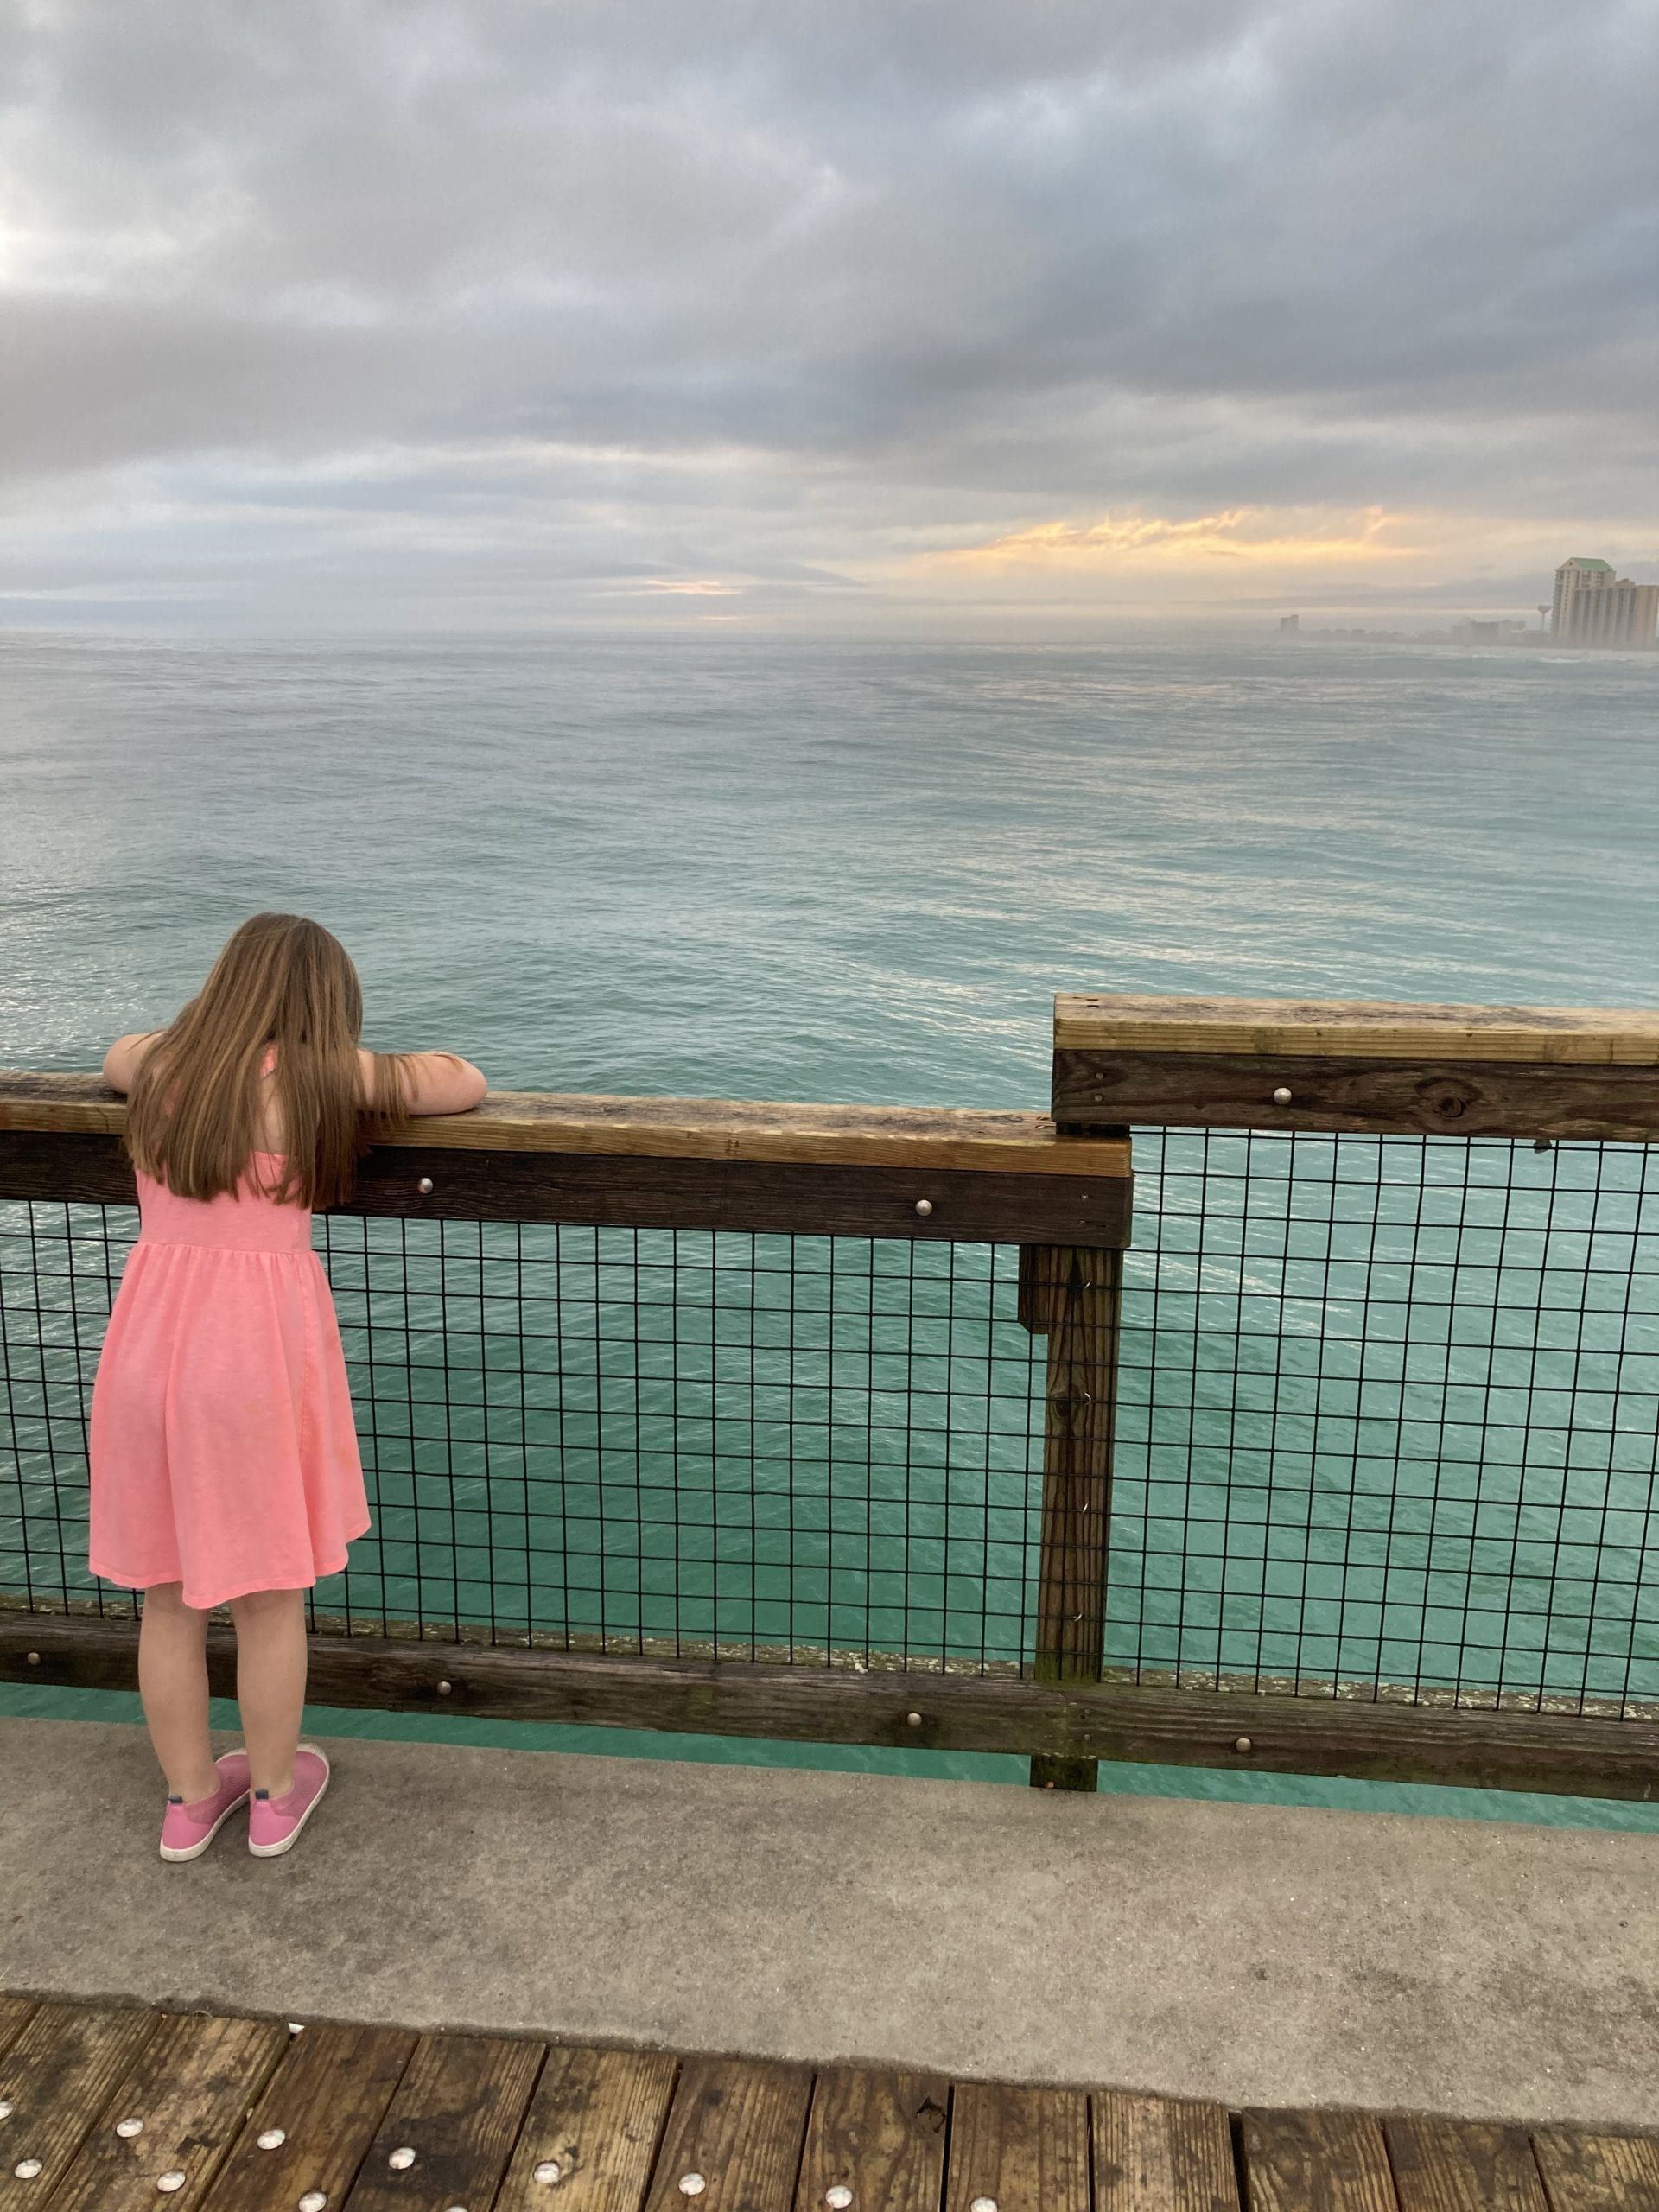 It's Friday Navarre!
Rain is in the forecast so grab your umbrella as you head out the door. Enjoy today's Photo of the Day, which displays the the wonder of a child on Navarre Beach Fishing Pier, submitted by Nicole Shaddix-Olsen.